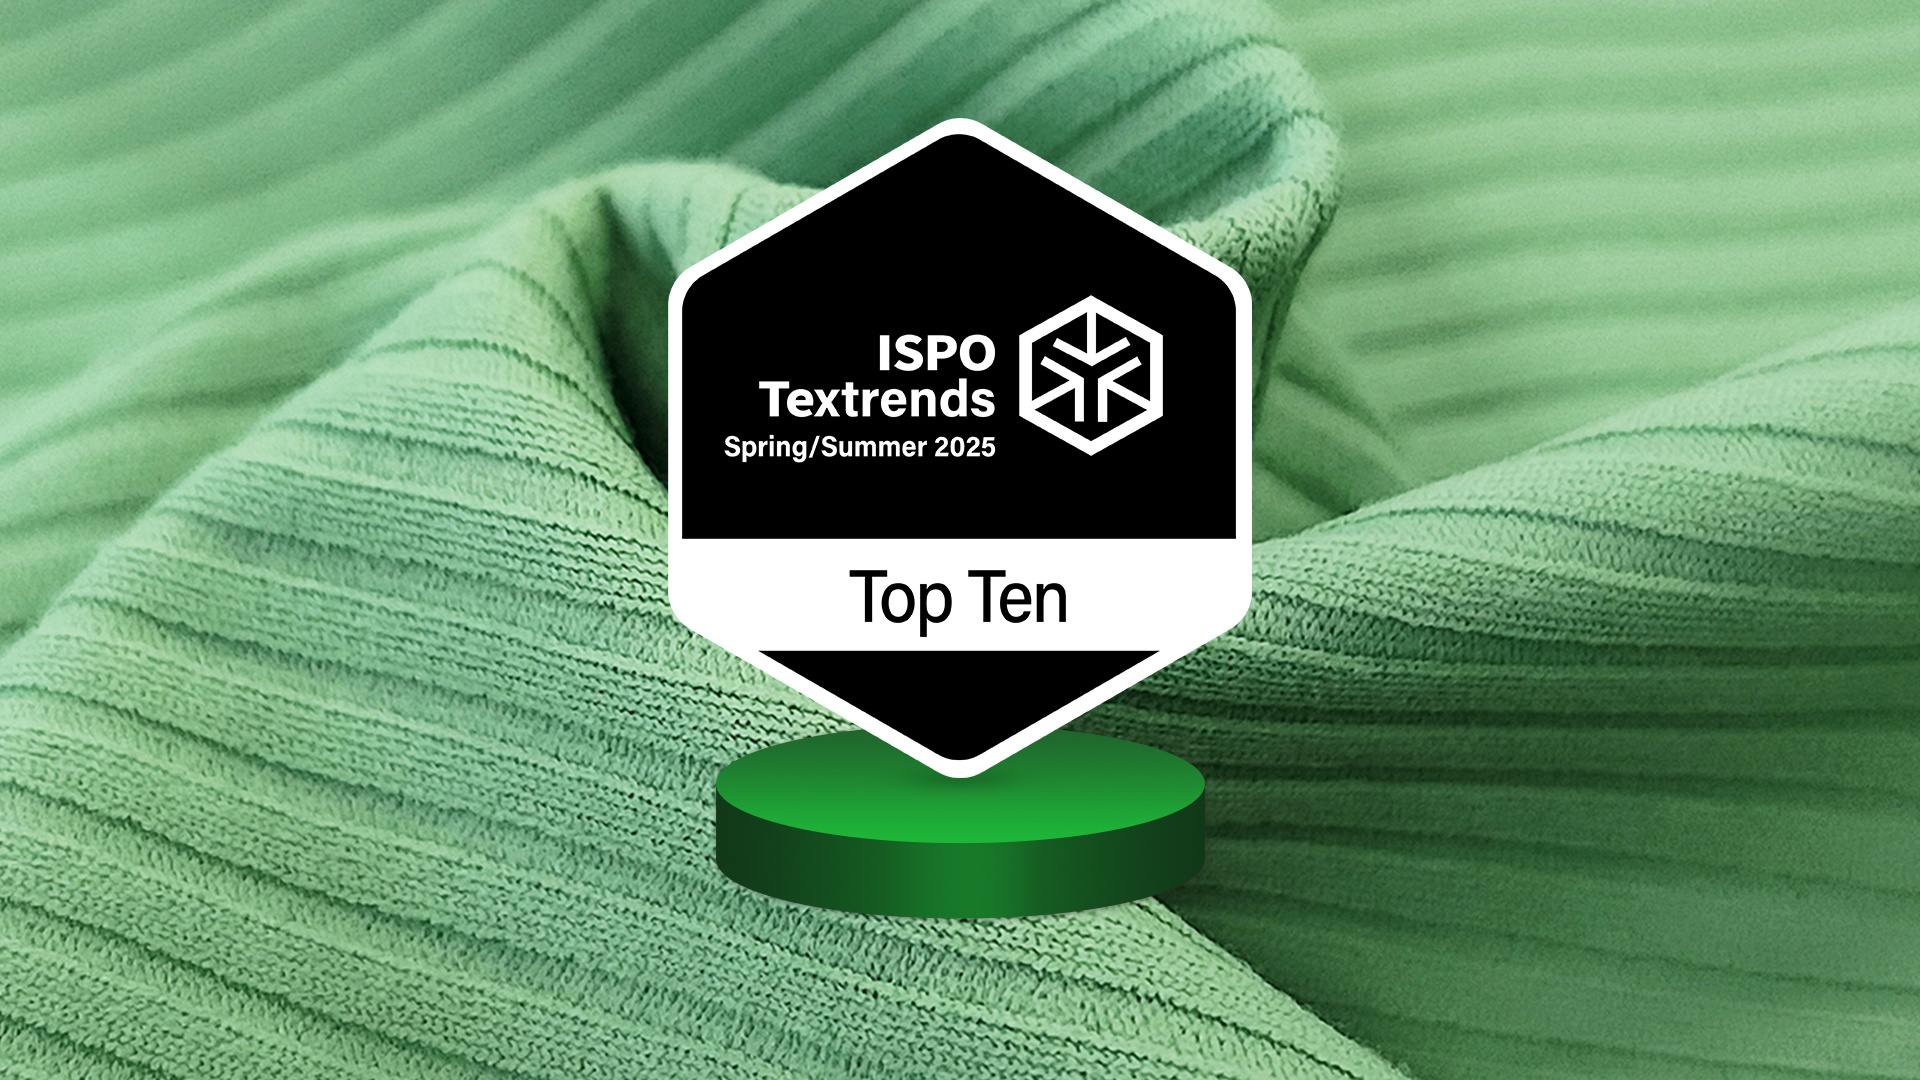 ISPO Textrends - Top 10